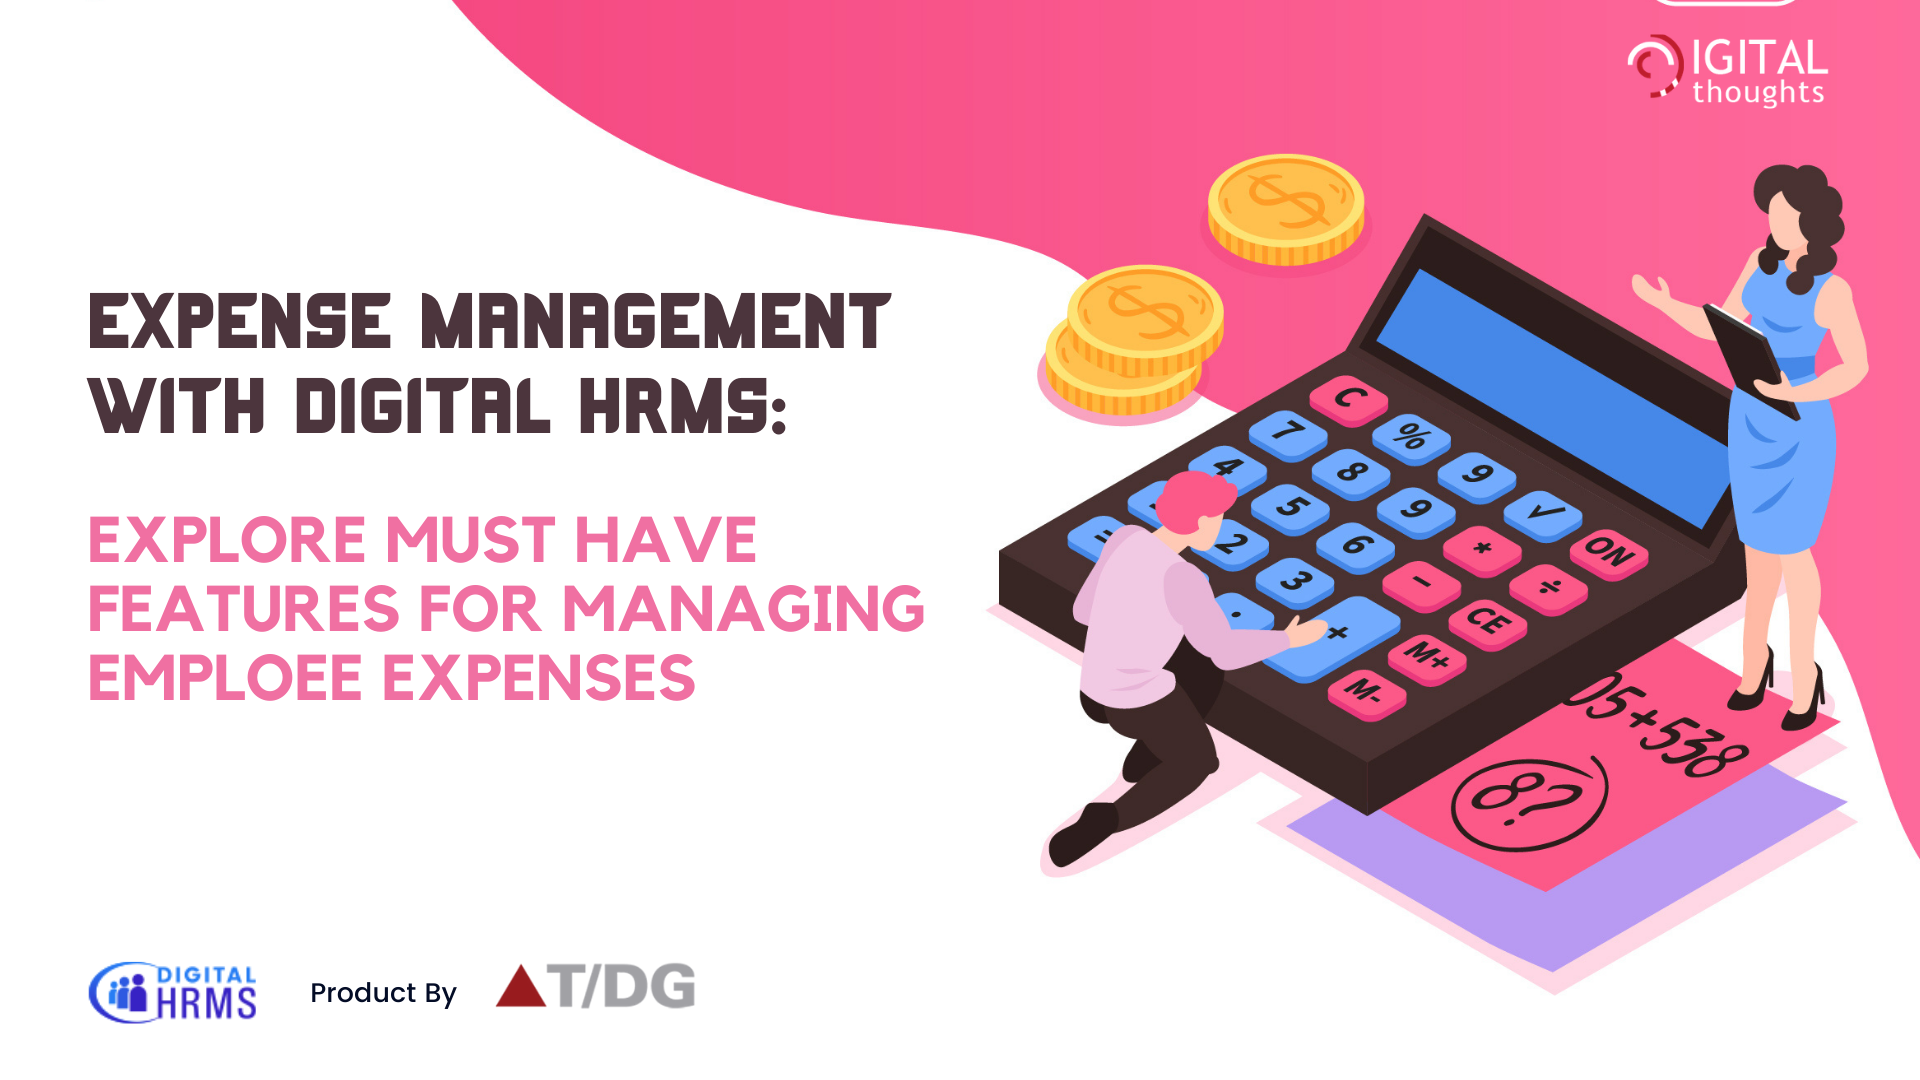 Expense Management with Digital HRMS: Explore Must Have Features for Managing Employee Expenses